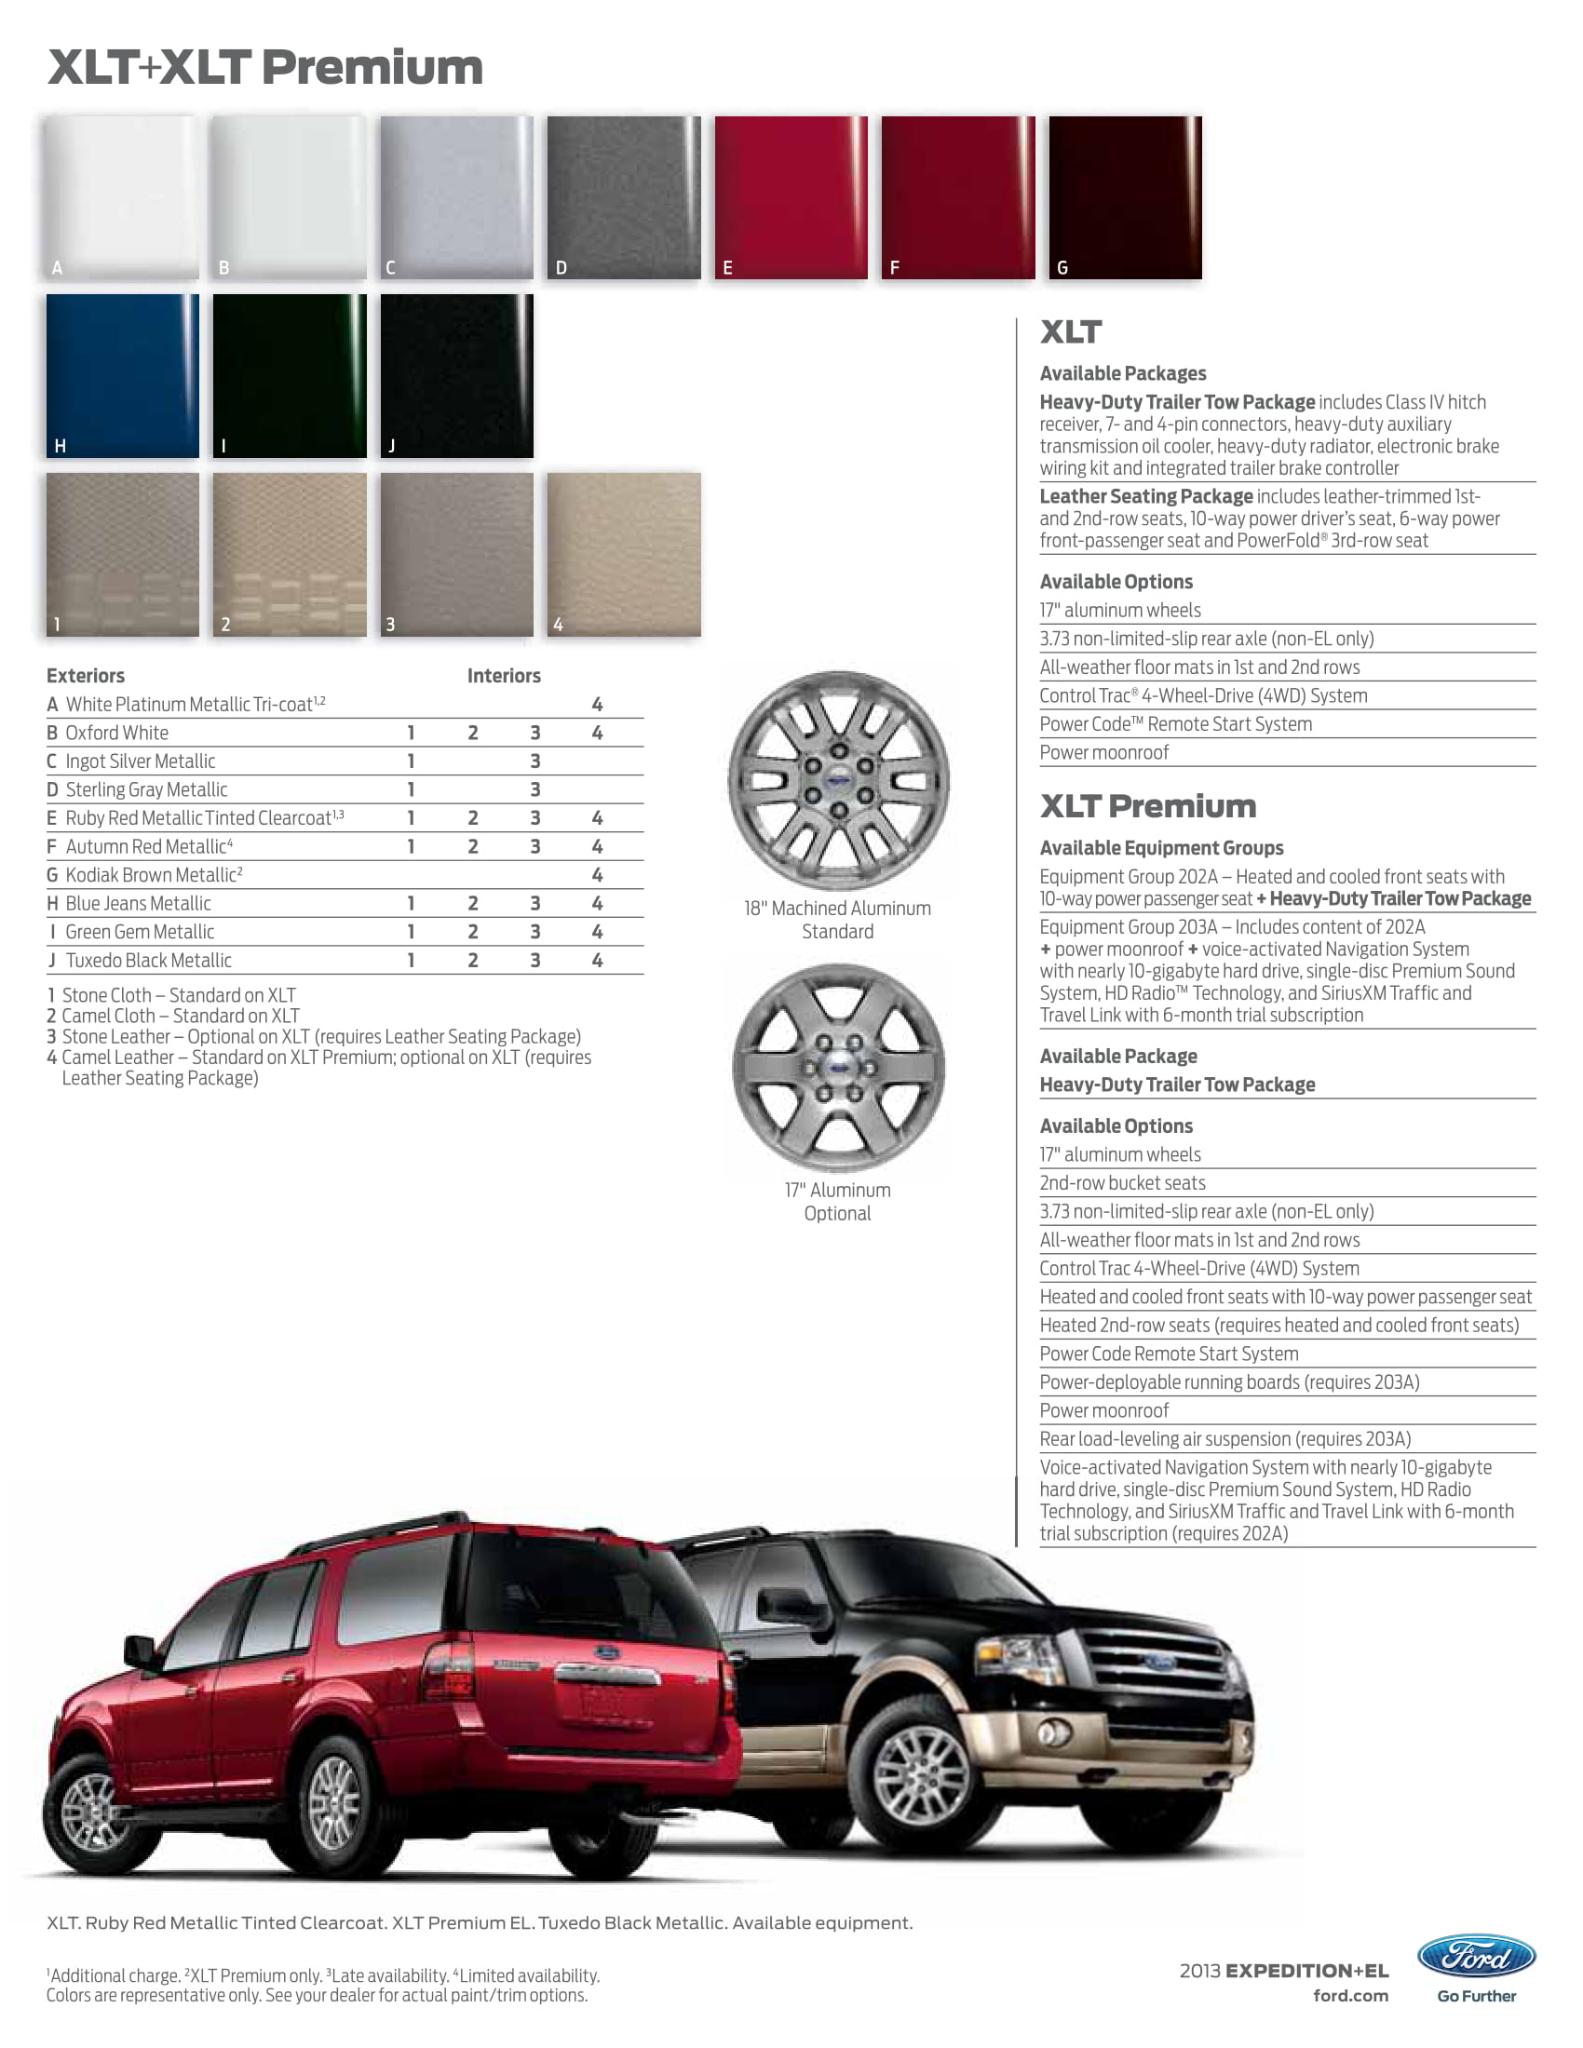 2003 ford excursion paint codes